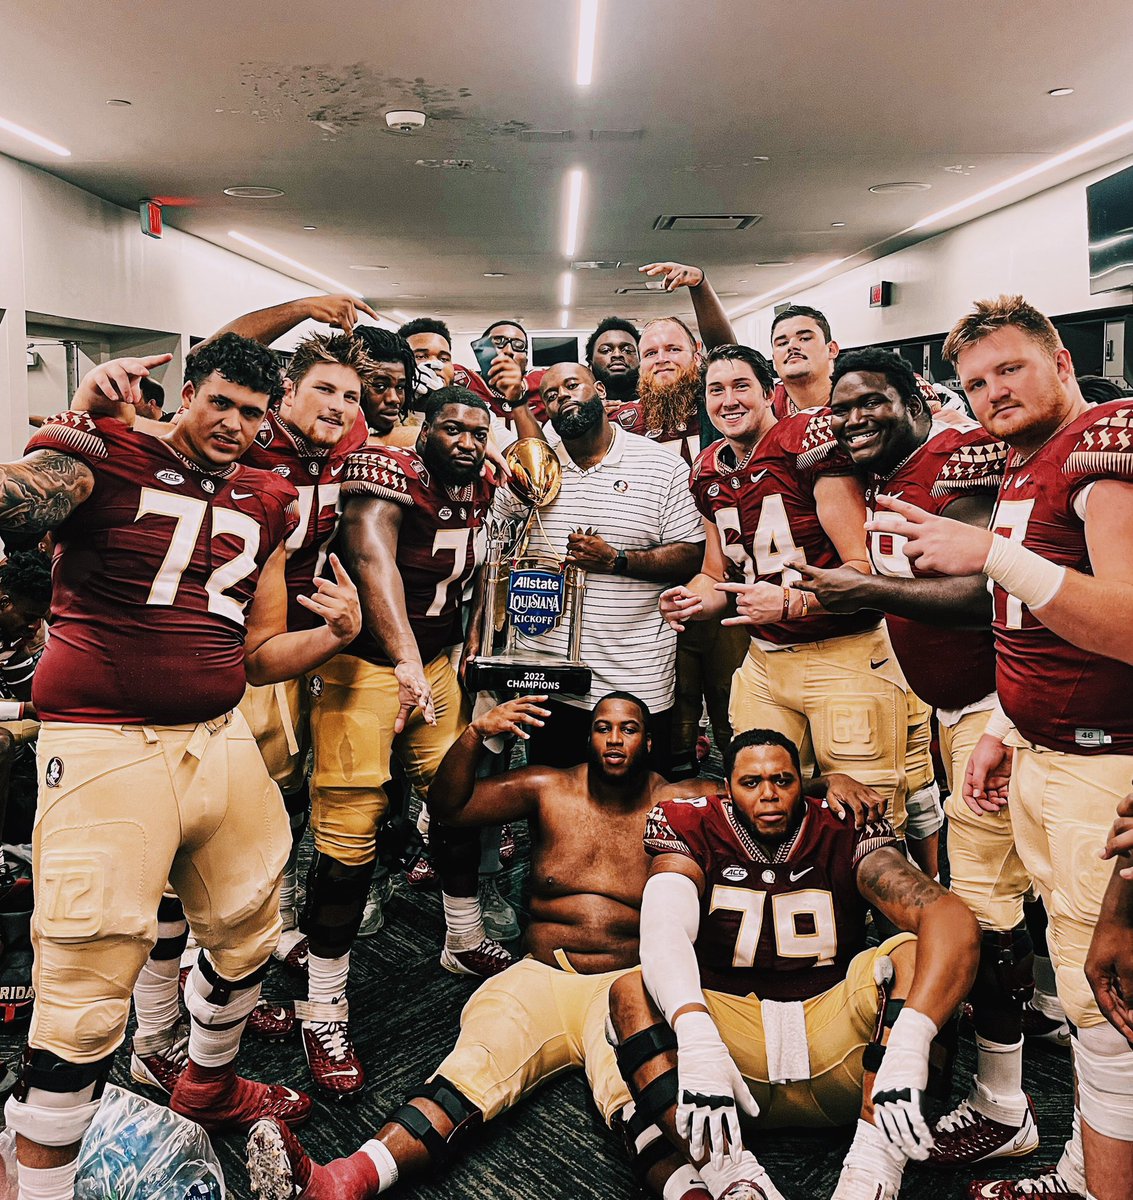 No fake accents on this team…

#GoNoles
#KeepCLIMBing